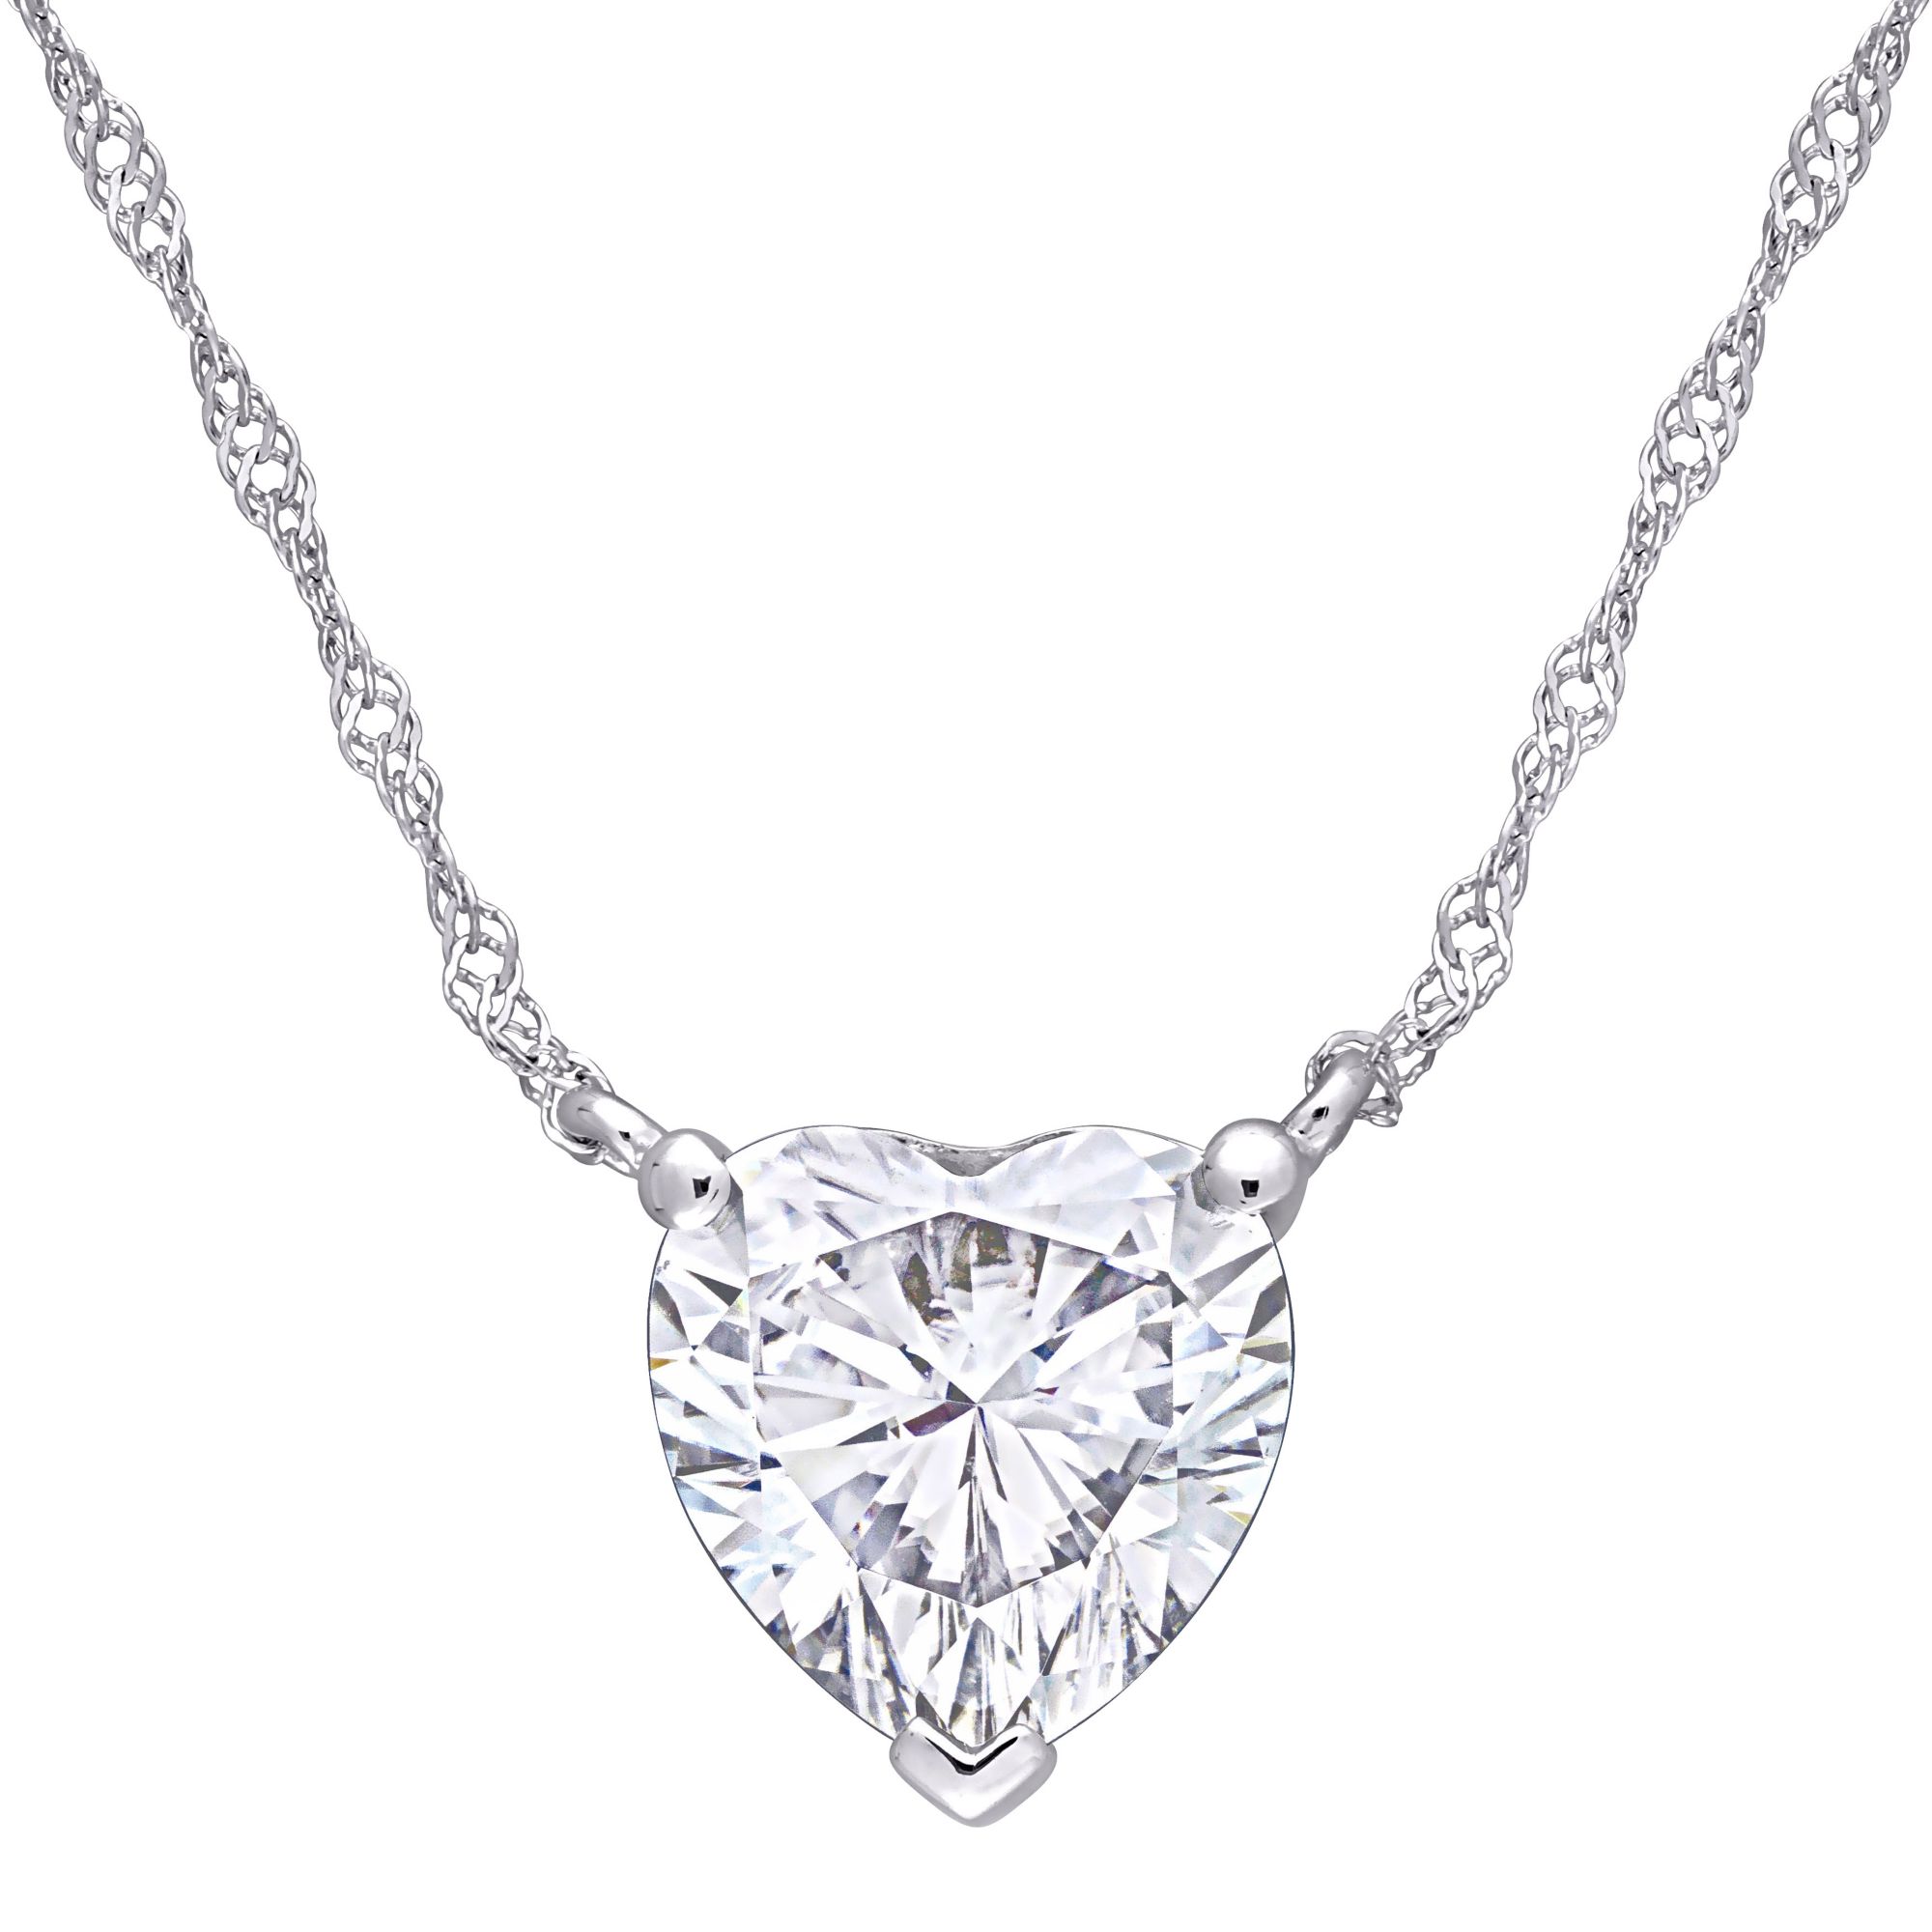 2 ct. DEW Created Moissanite Heart Solitaire Necklace in 10k White Gold